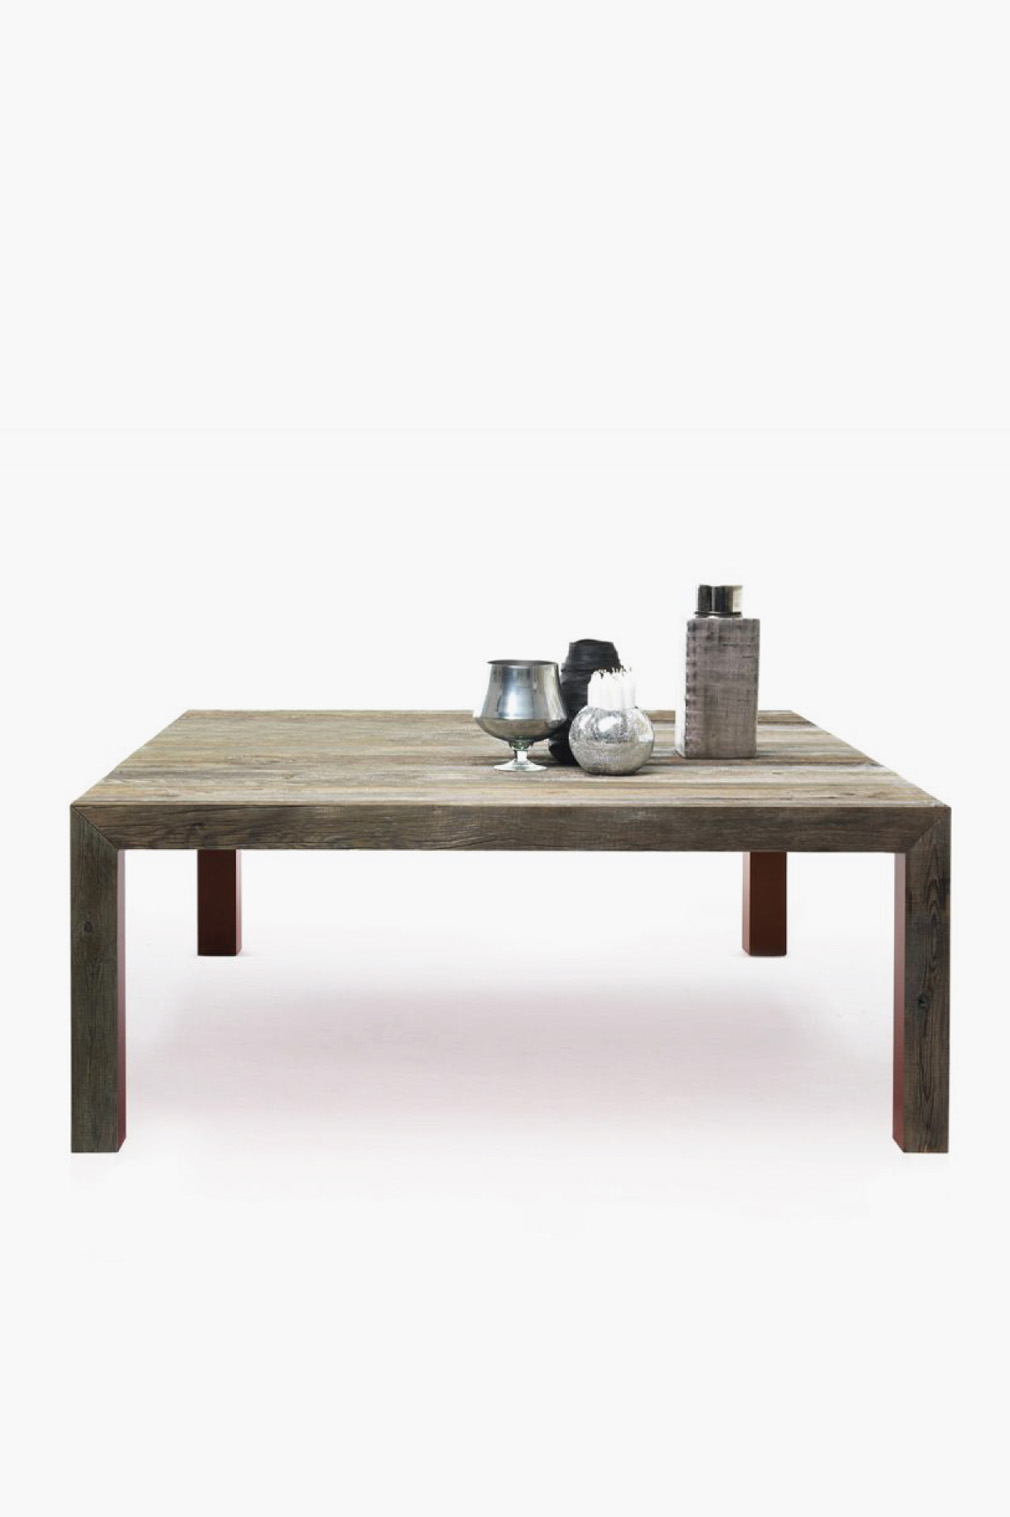 MOGG Tables Zio Tom Table 01